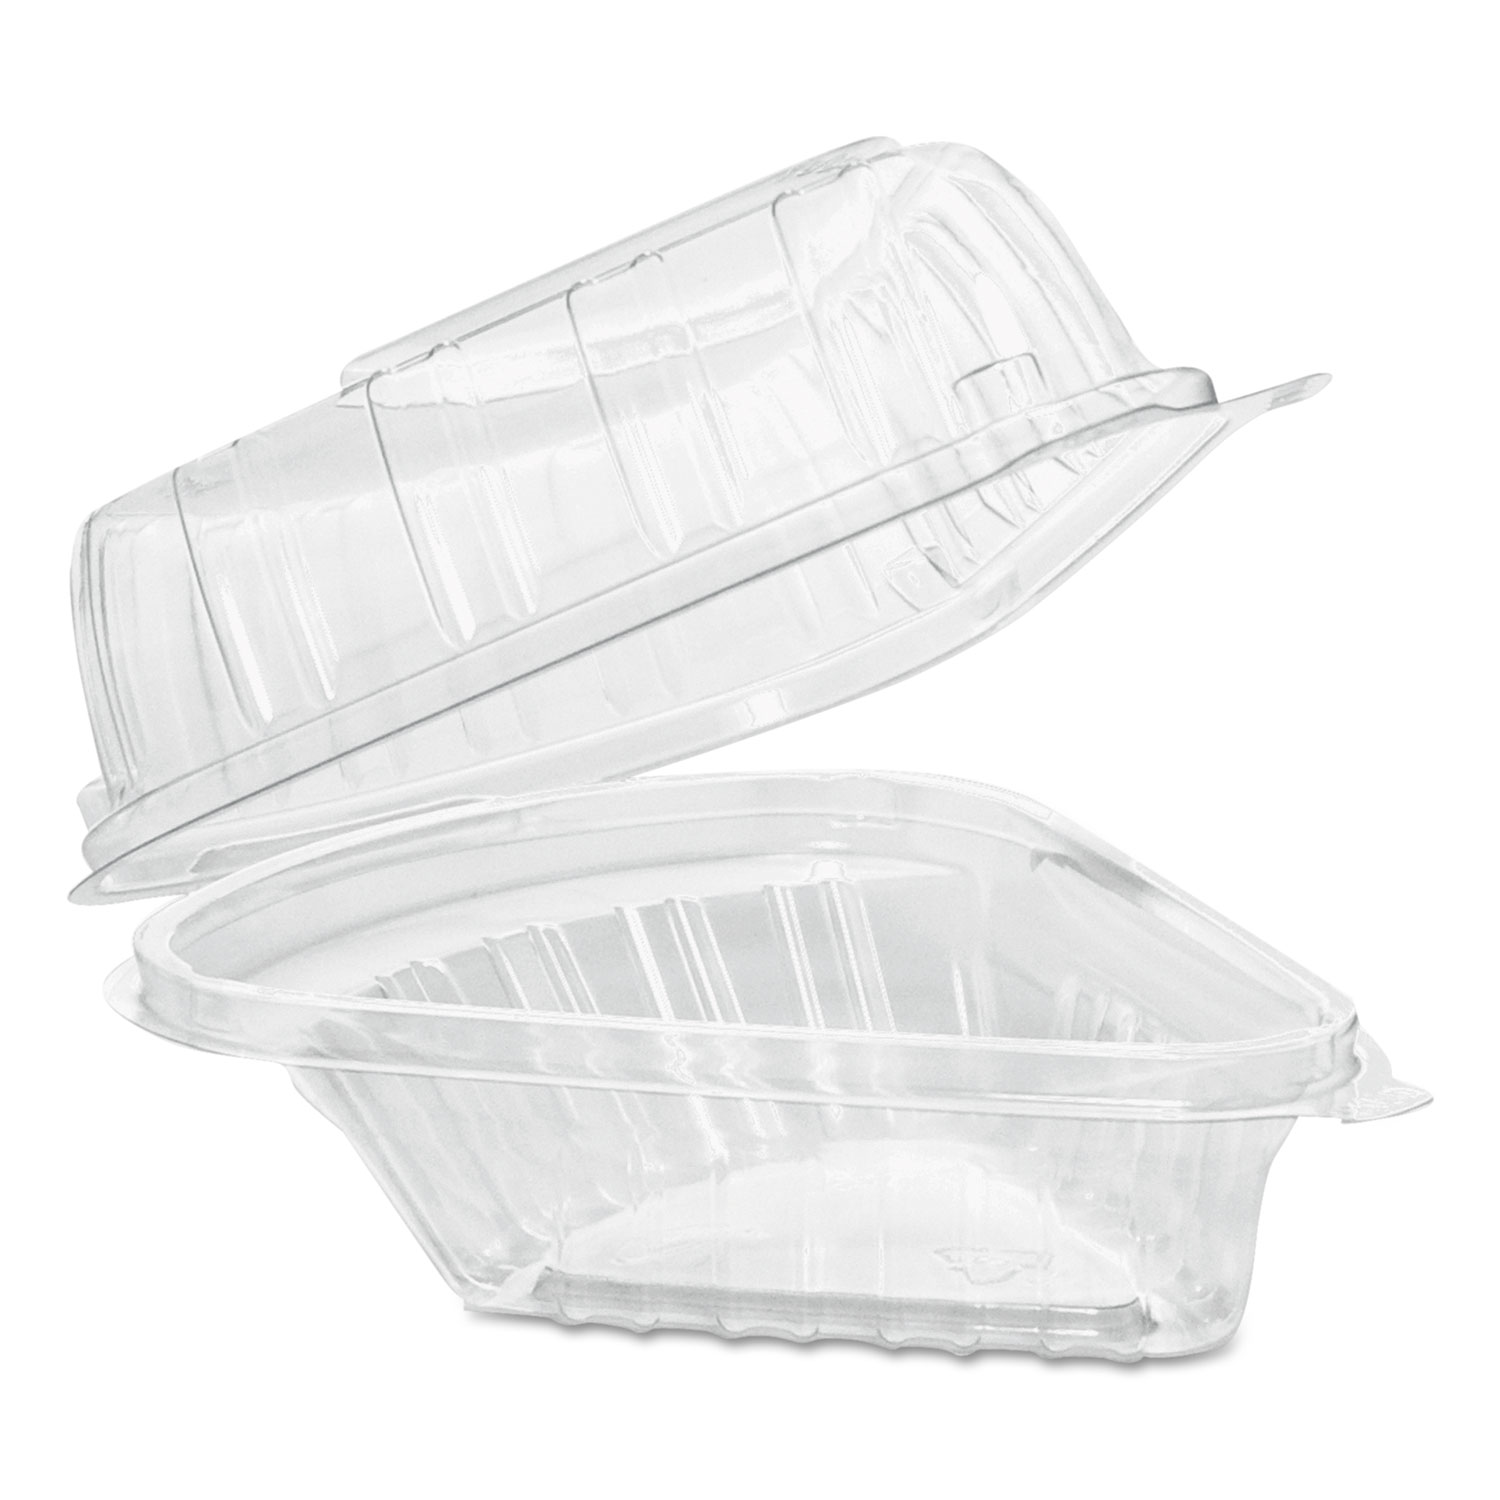  Dart C54HT1 Showtime Clear Hinged Containers, Pie Wedge, 6 2/3 oz, Plastic, 125/PK, 2 PK/CT (DCCC54HT1) 